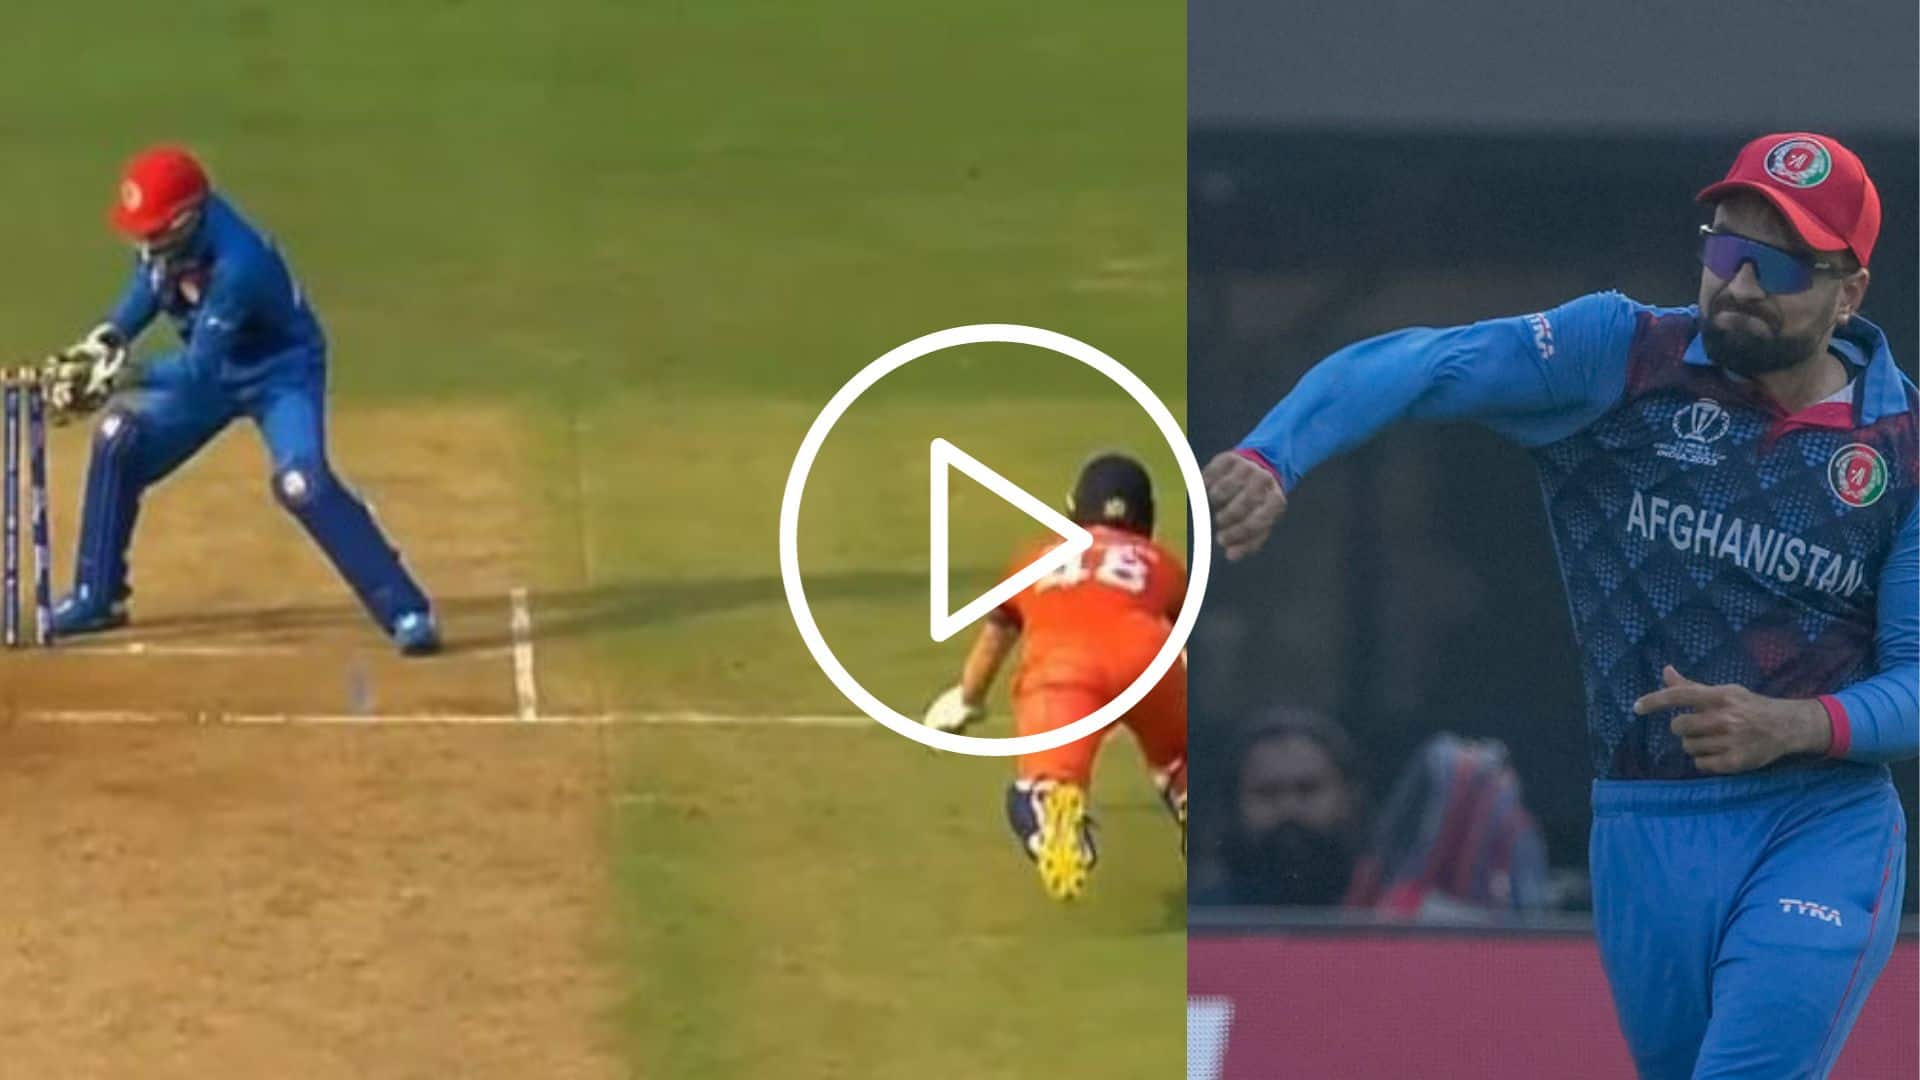 [Watch] Rashid Khan's Stunning Fielding Effort Results In Disastrous Run Out For Netherlands